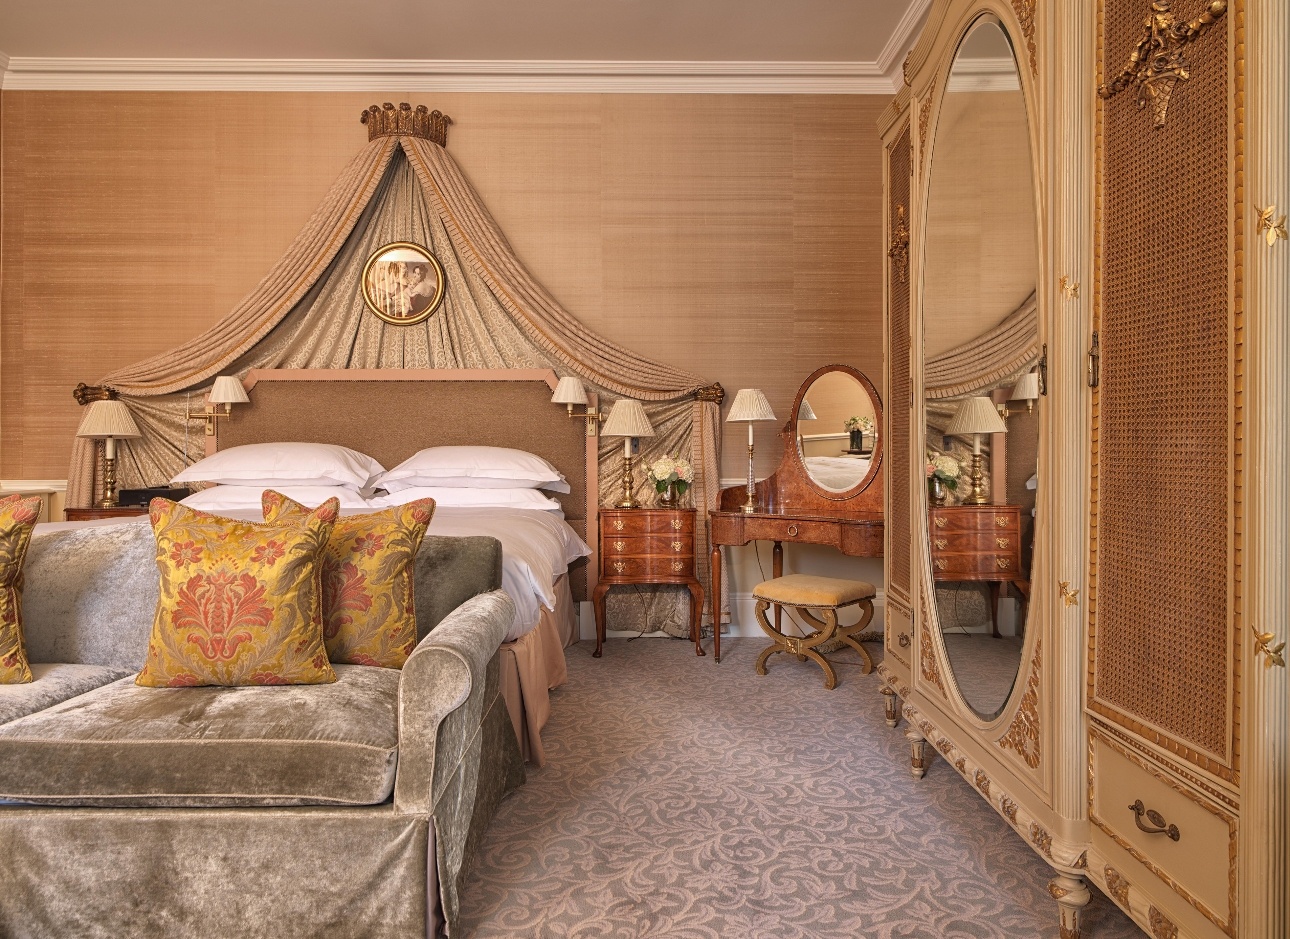 Cliveden House in Berkshire awarded one of the Top 50 Boutique Hotels in the UK